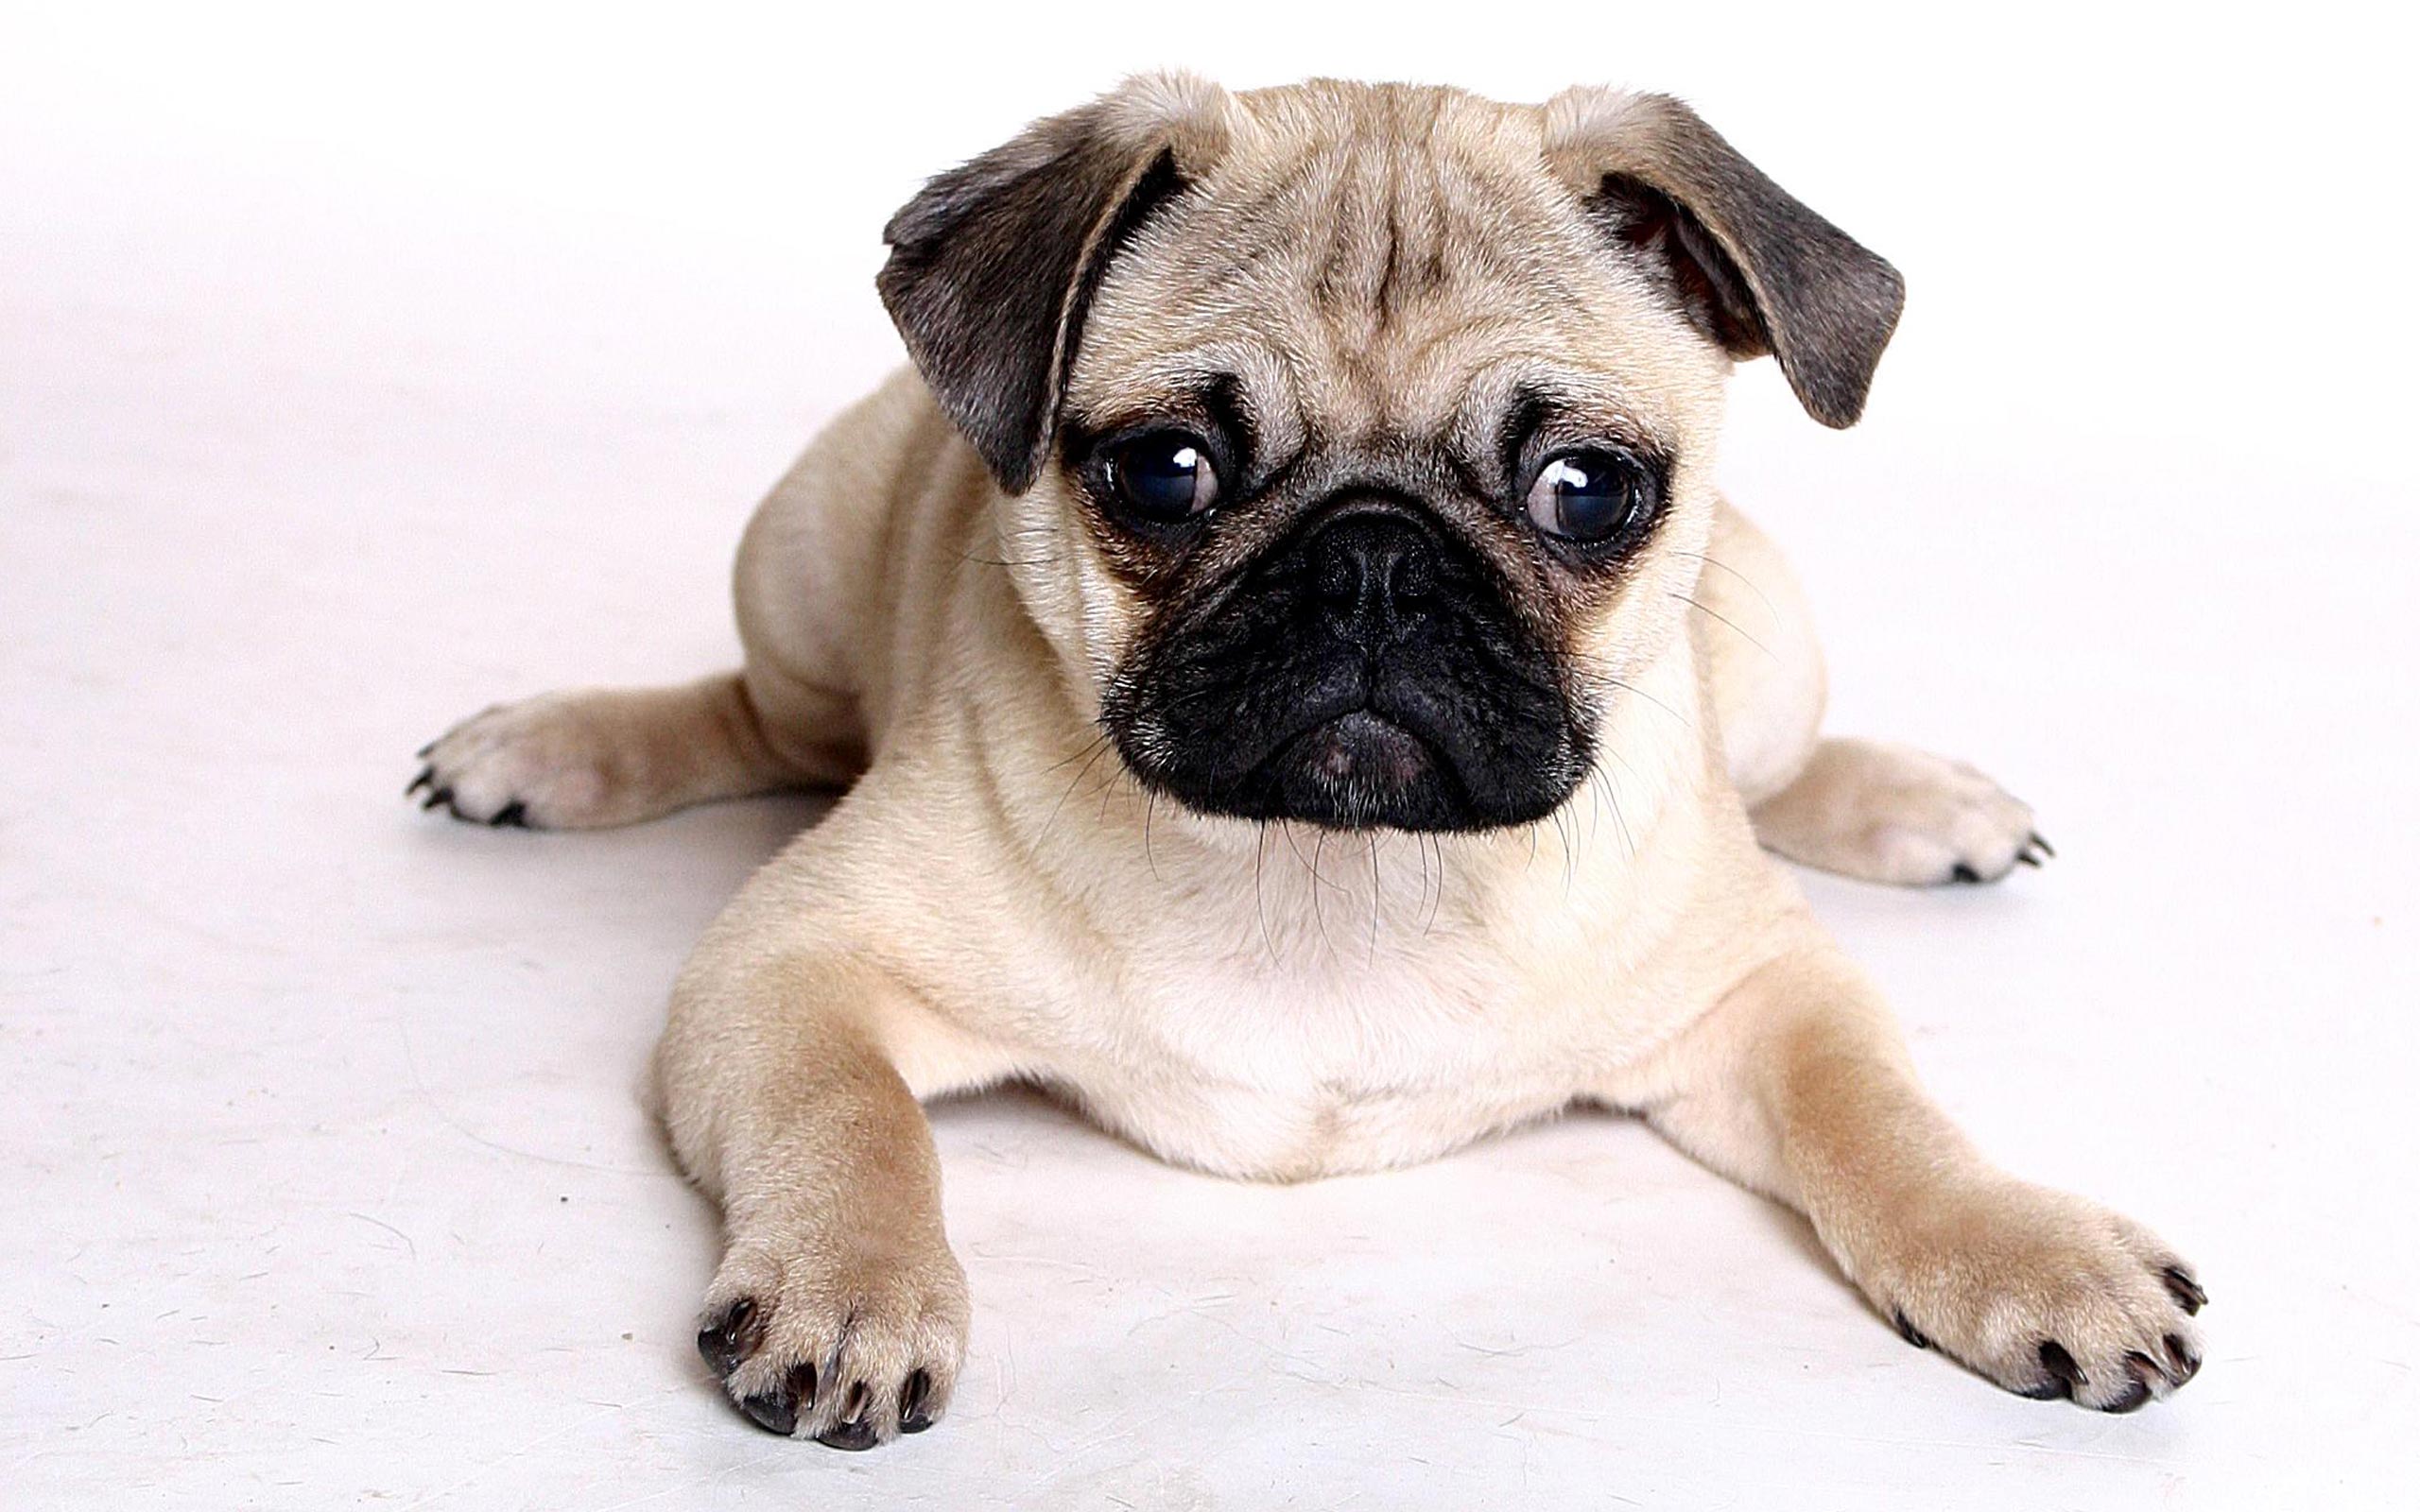 Cute Pug Puppies Images Download - Pug With No Background - HD Wallpaper 